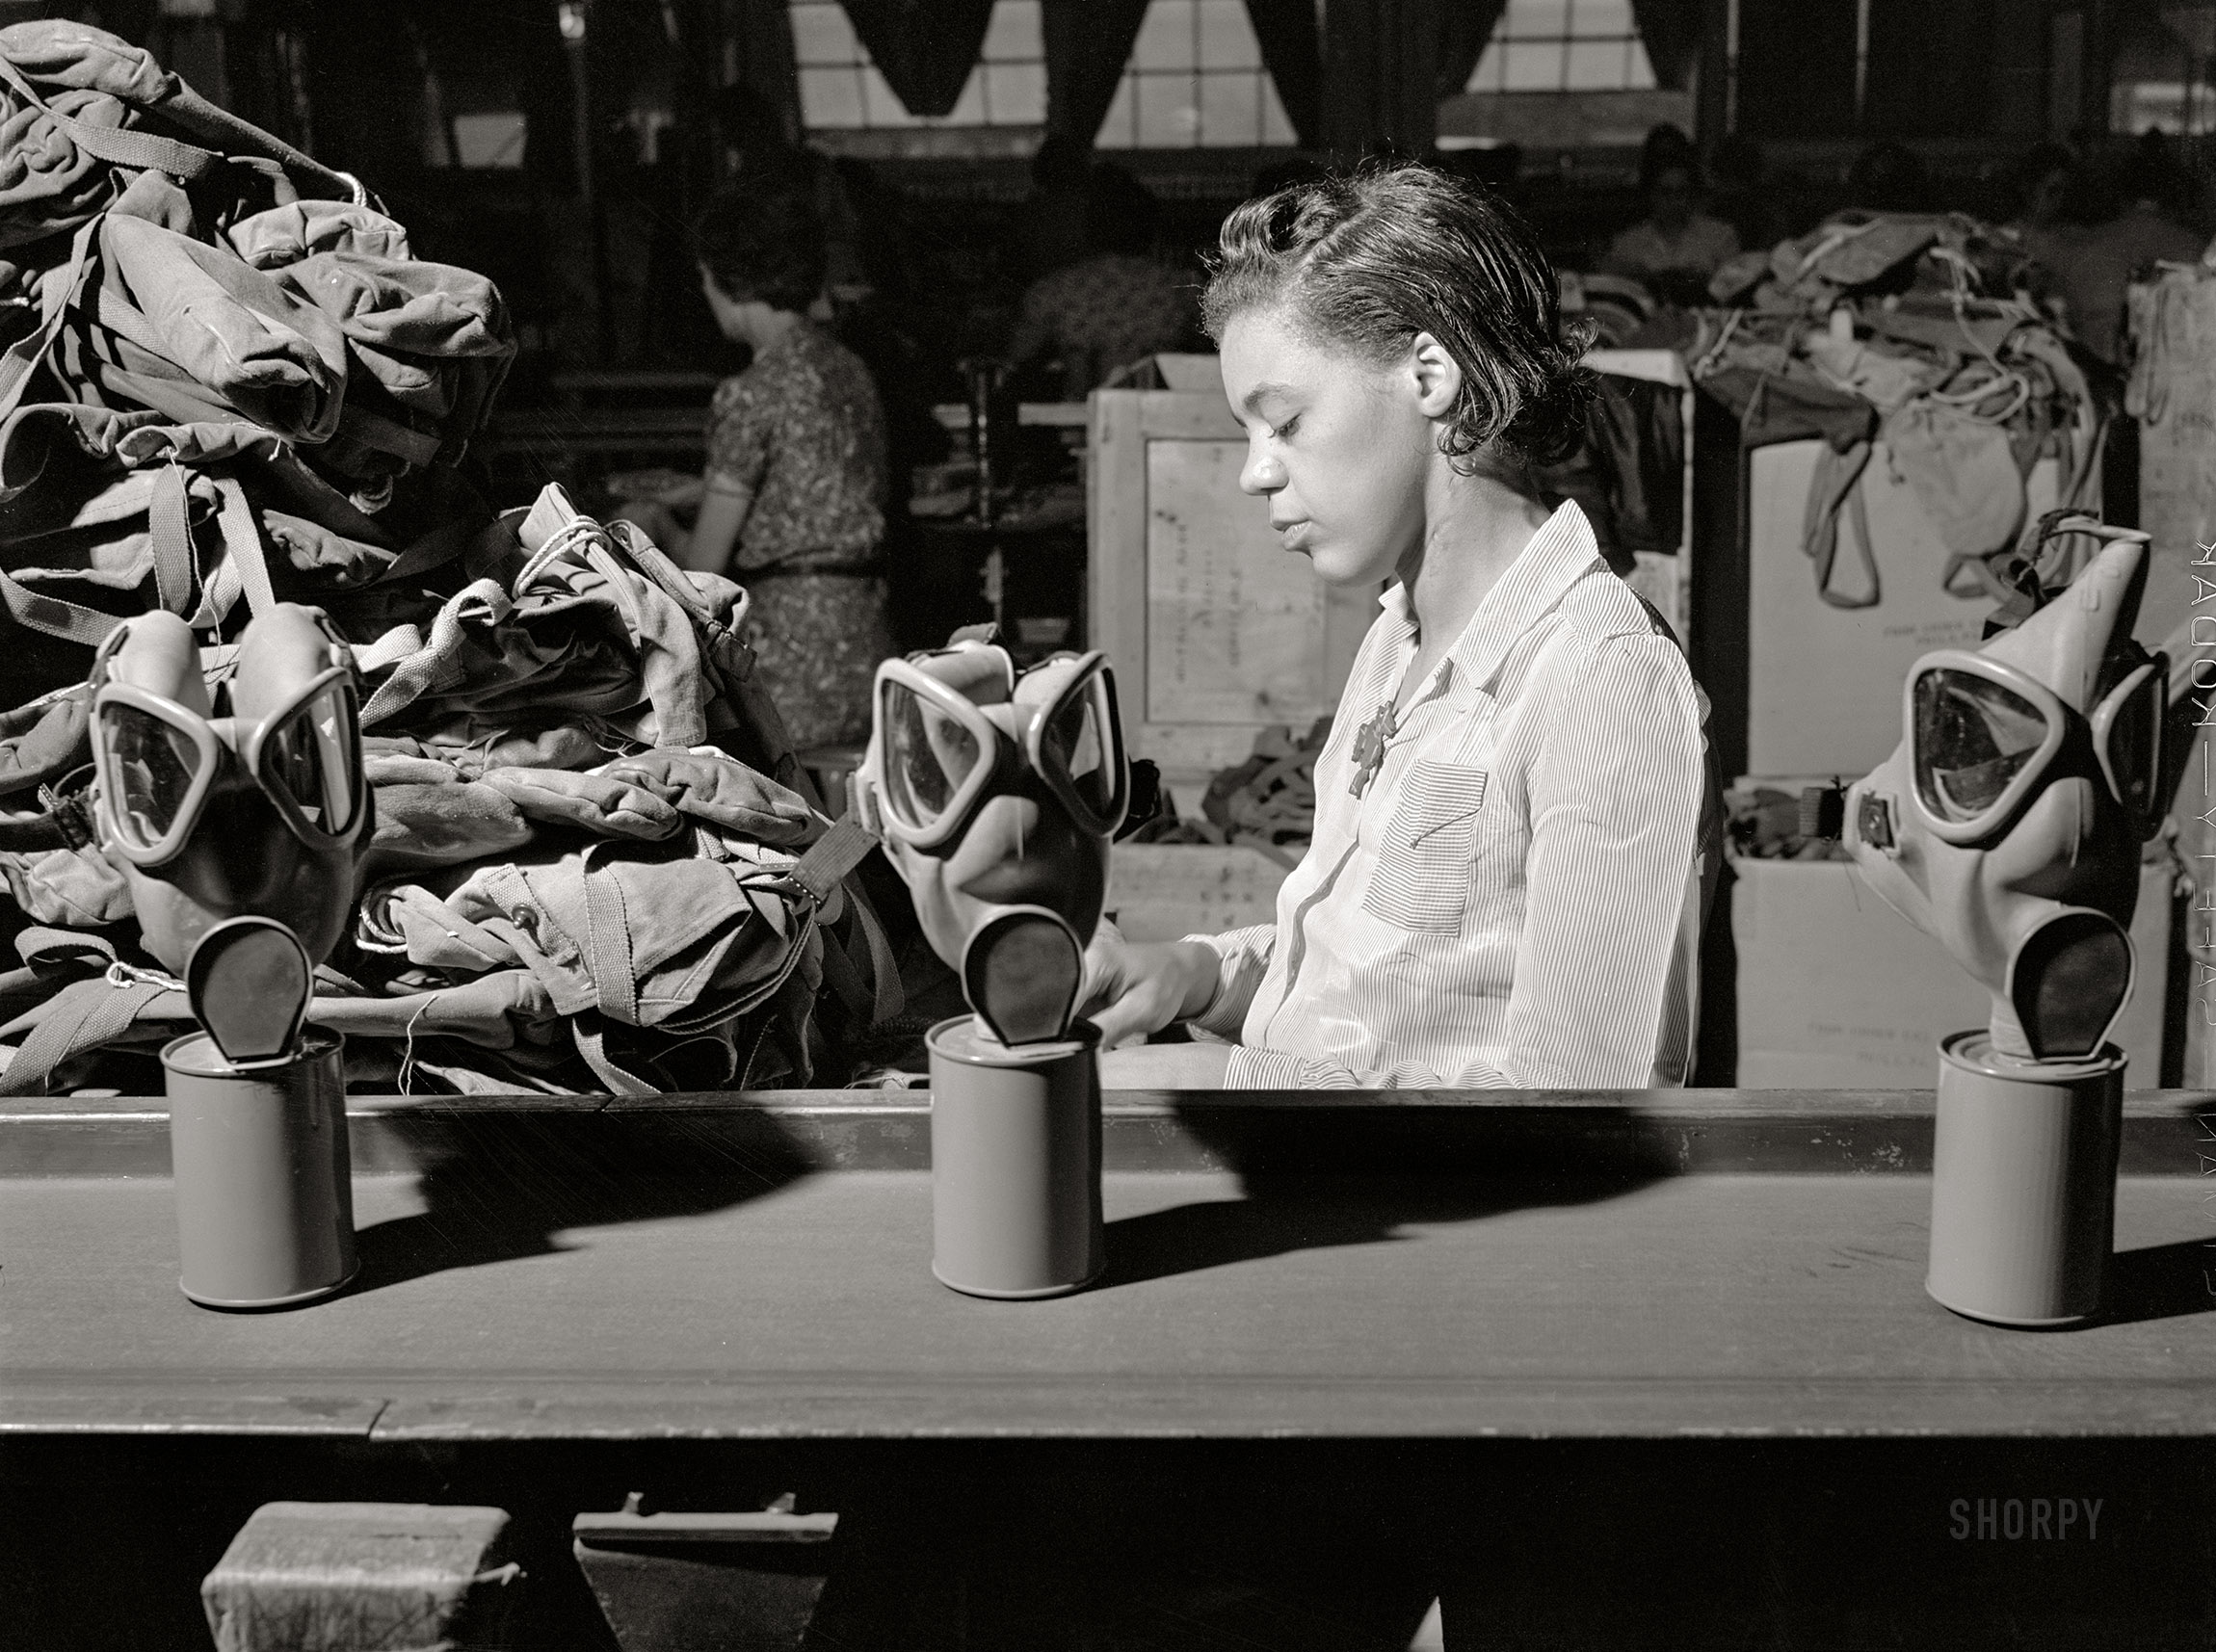 June 1942. "Edgewood Arsenal, Maryland. Gas demonstration. Reconditioning gas masks at the gas mask factory." Medium format acetate negative by Jack Delano. View full size.